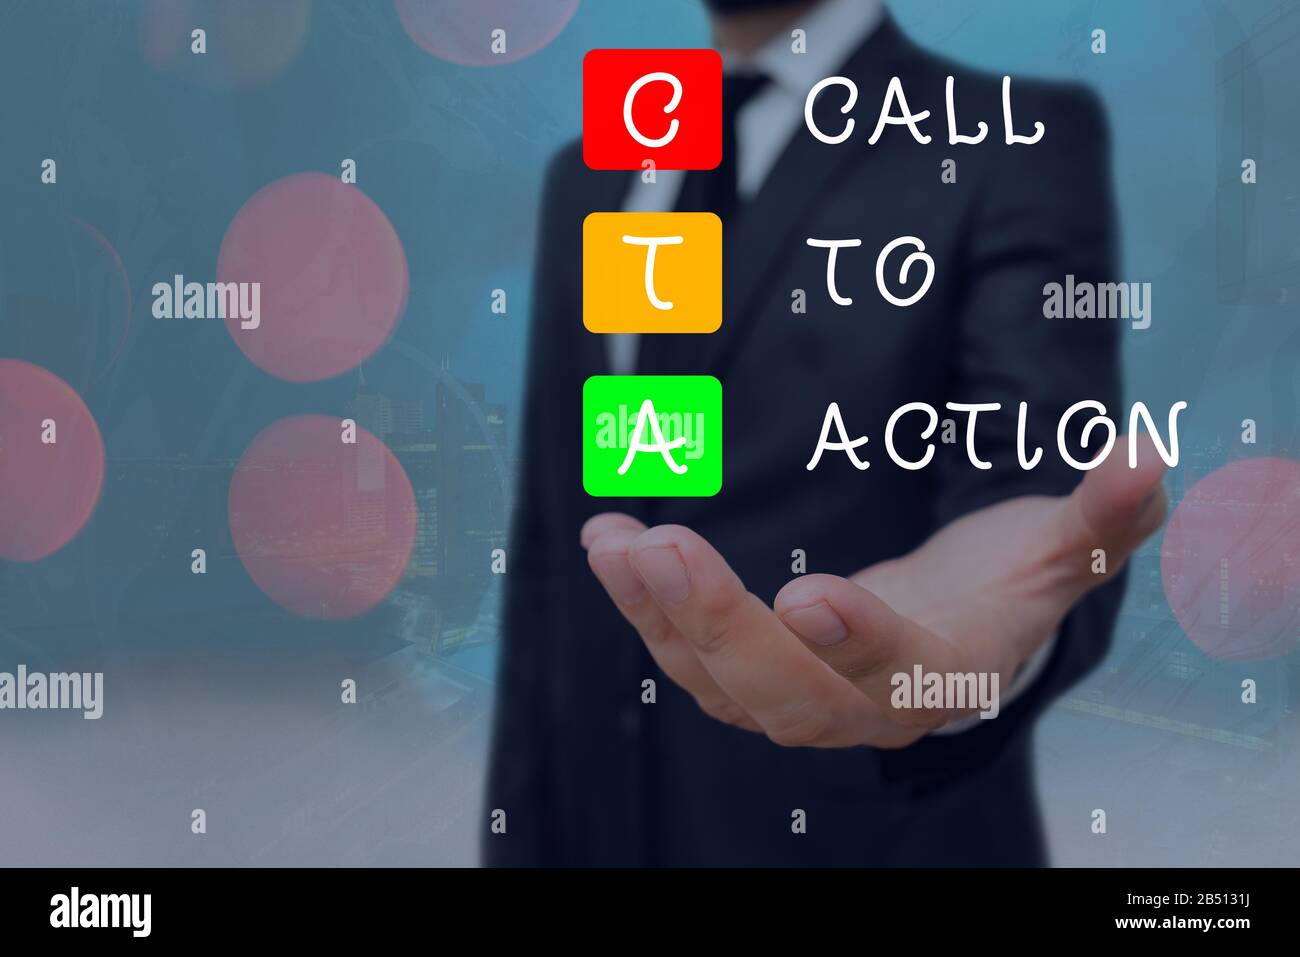 Conceptual hand writing showing Cal To Action. Concept meaning Calling to do Actions message. Encourage Start of Decision or inspire to do something. Stock Photo